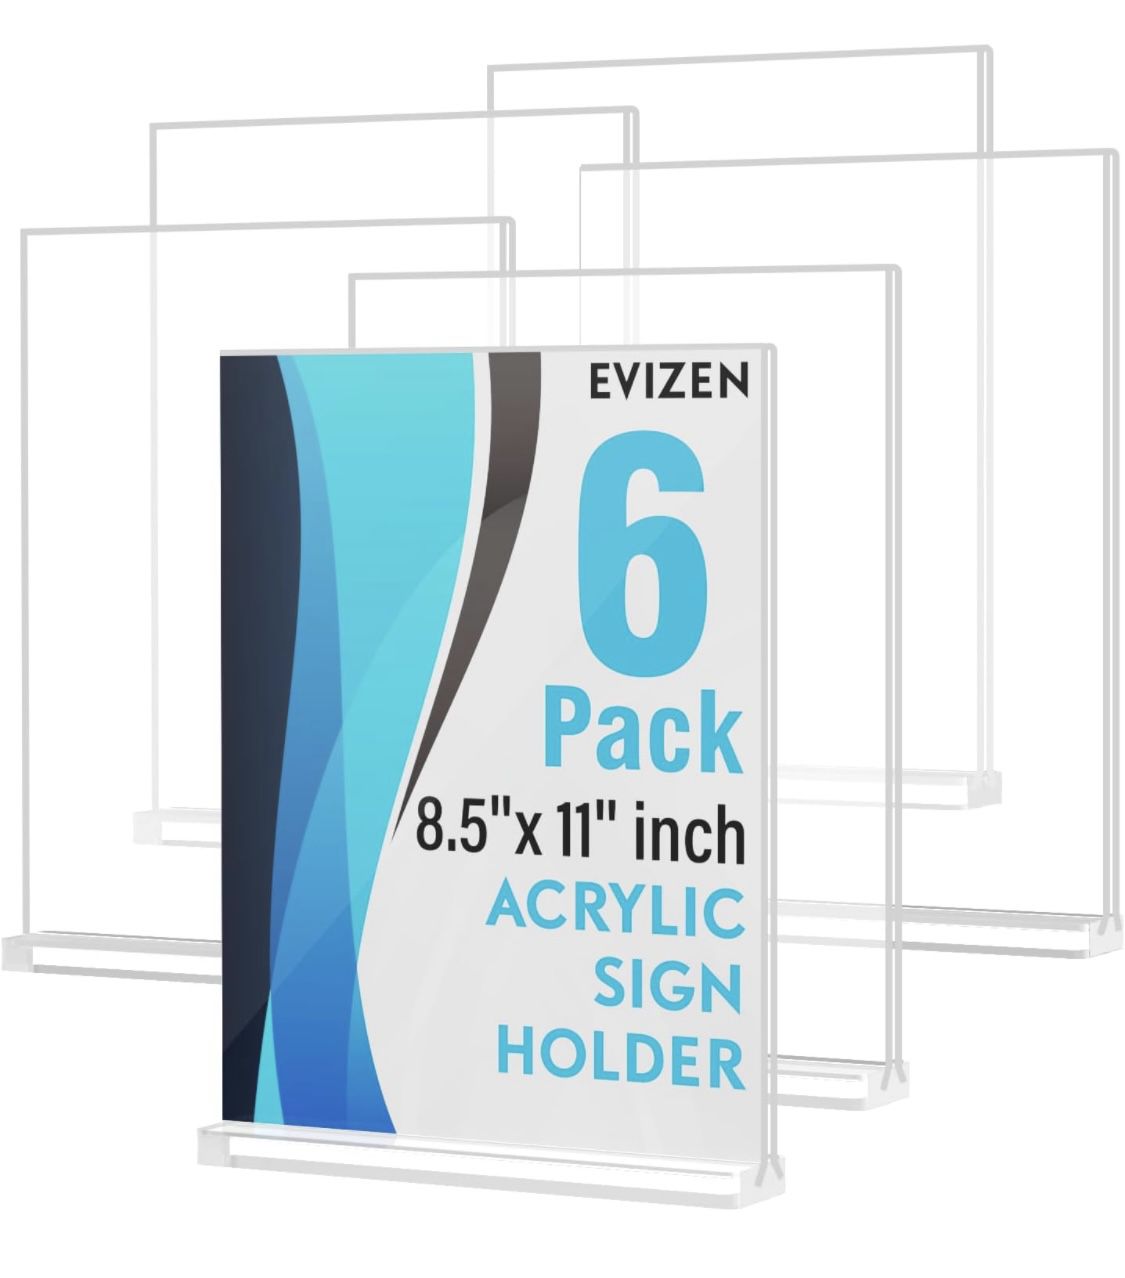 Acrylic Sign Holder 8.5 x 11 6pack for Sale in Las Vegas, NV - OfferUp